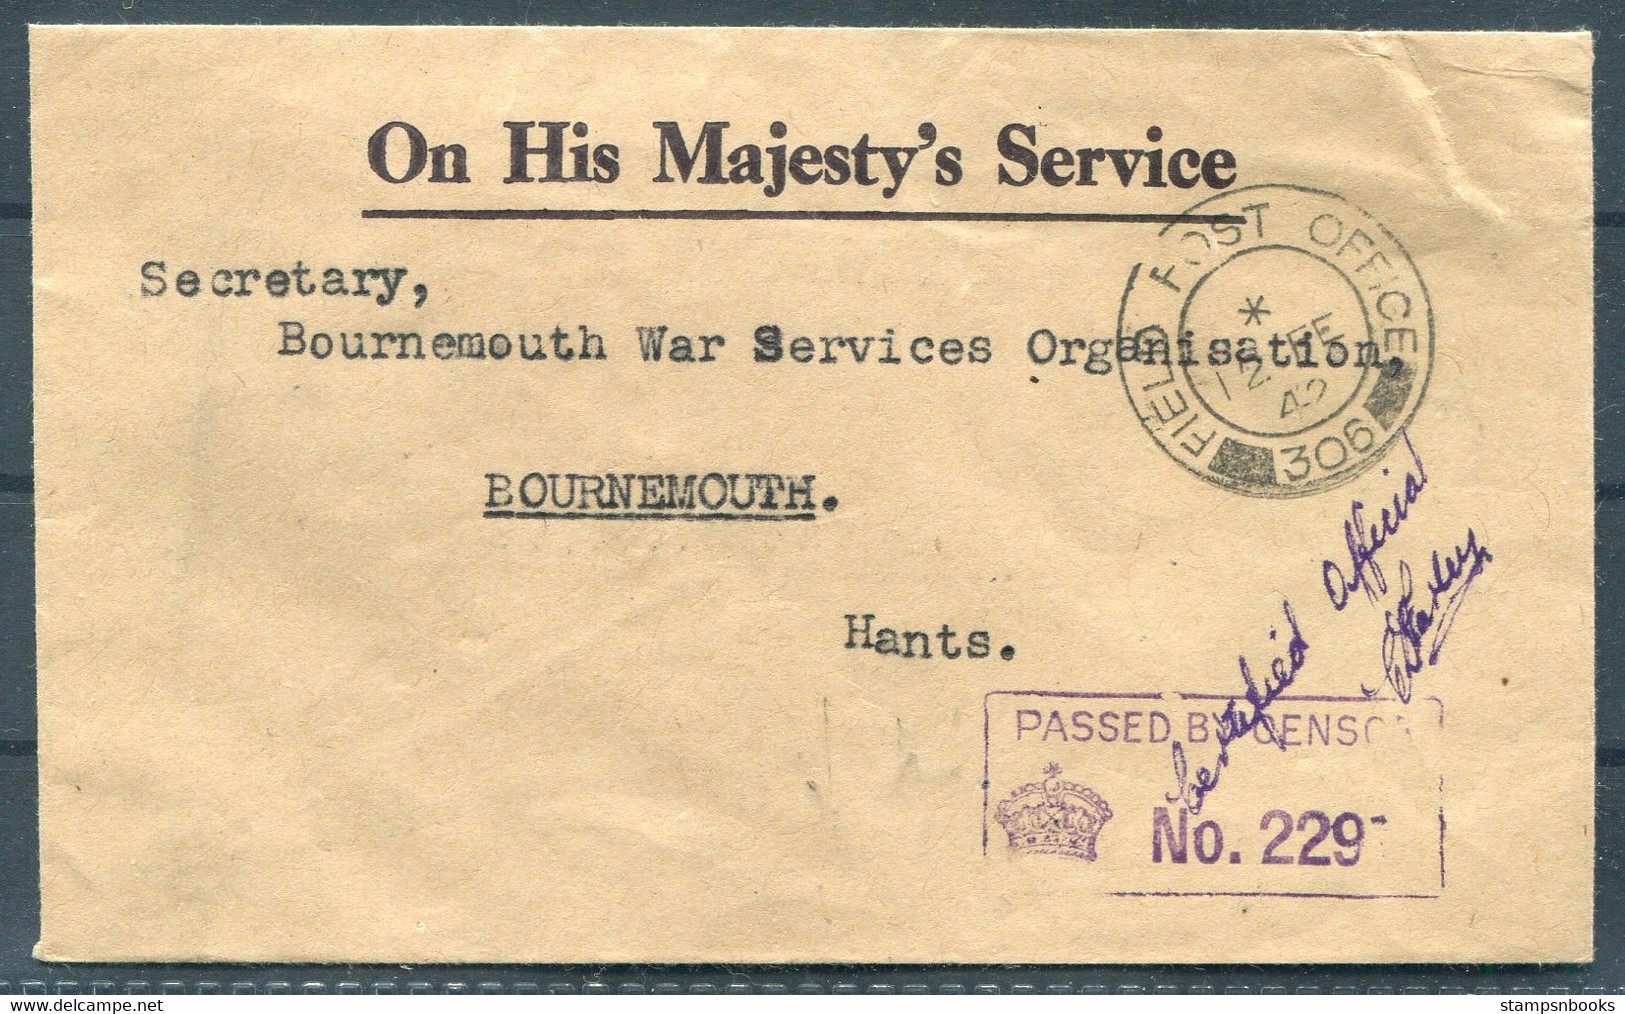 1942 Iceland Field Post Office FPO 306 O.H.M.S. "Certified Official" Censor Cover, Bournemouth War Service Organisation - Cartas & Documentos